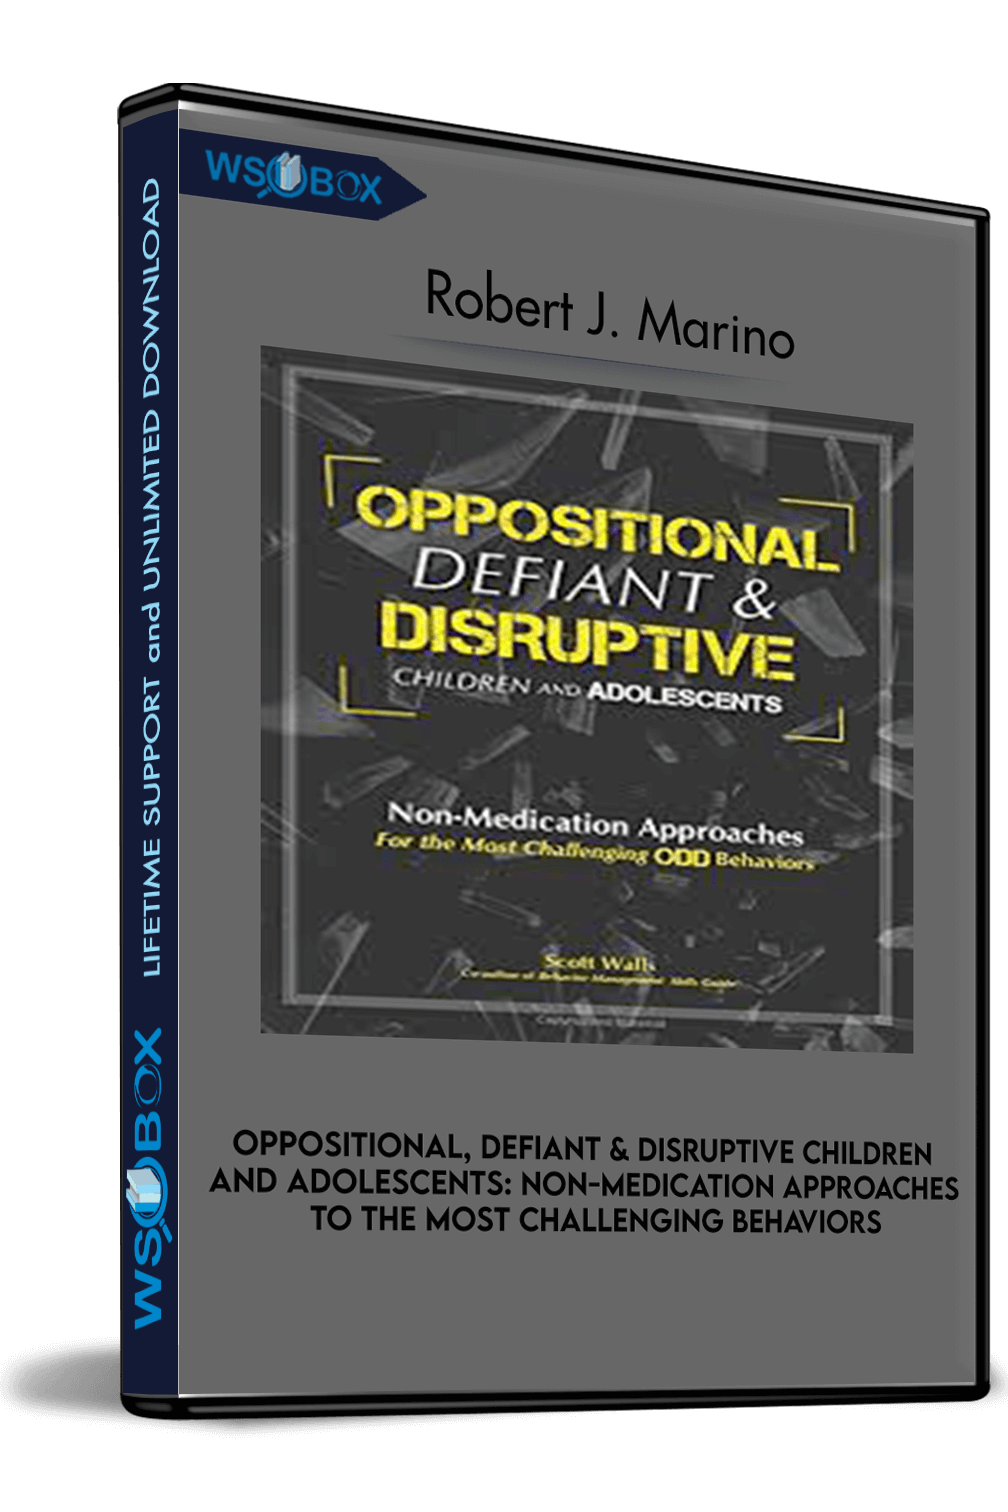 oppositional-defiant-disruptive-children-and-adolescents-non-medication-approaches-to-the-most-challenging-behaviors-robert-j-marino